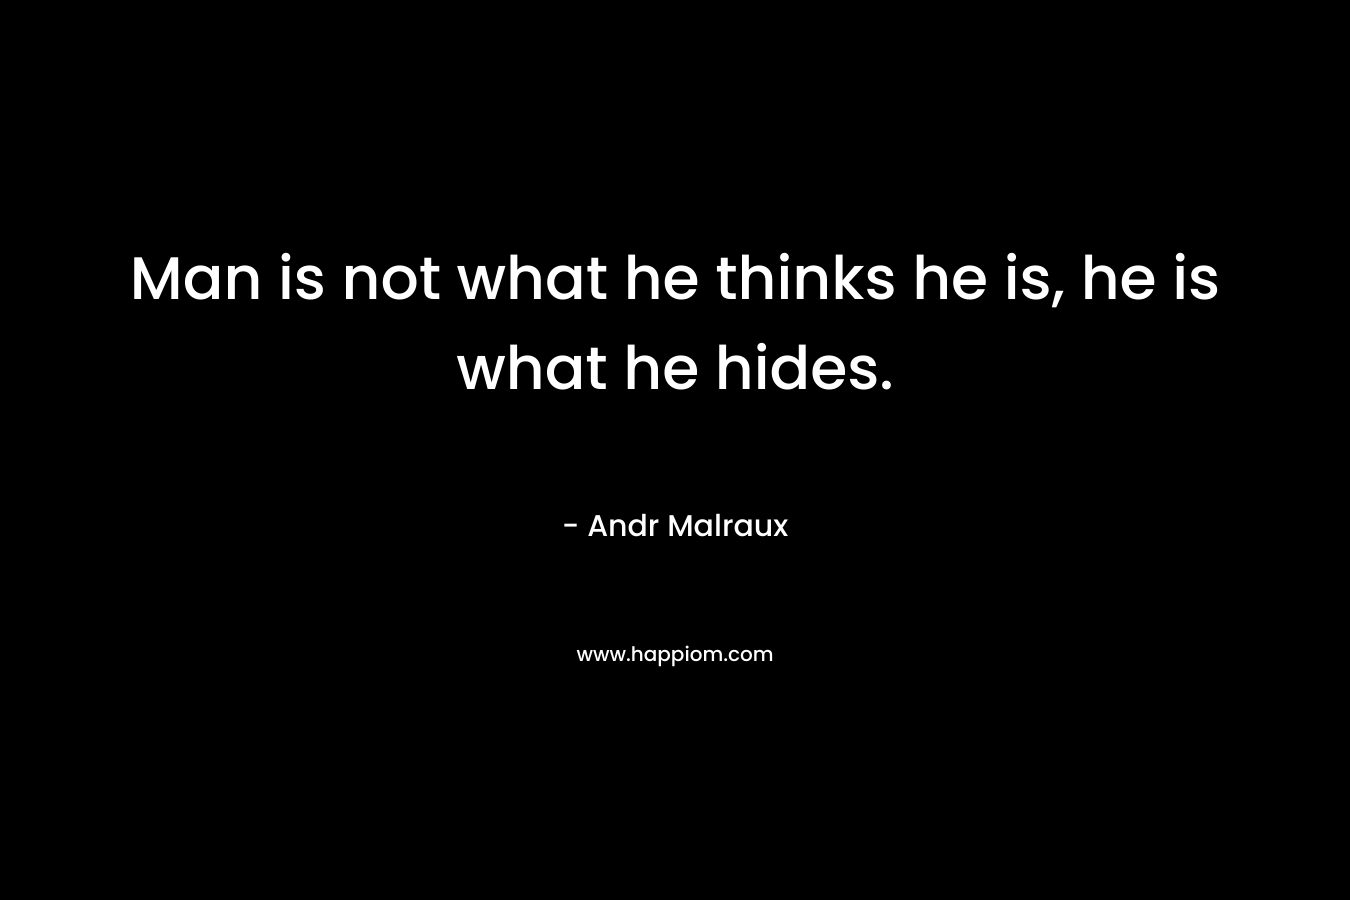 Man is not what he thinks he is, he is what he hides. – Andr Malraux